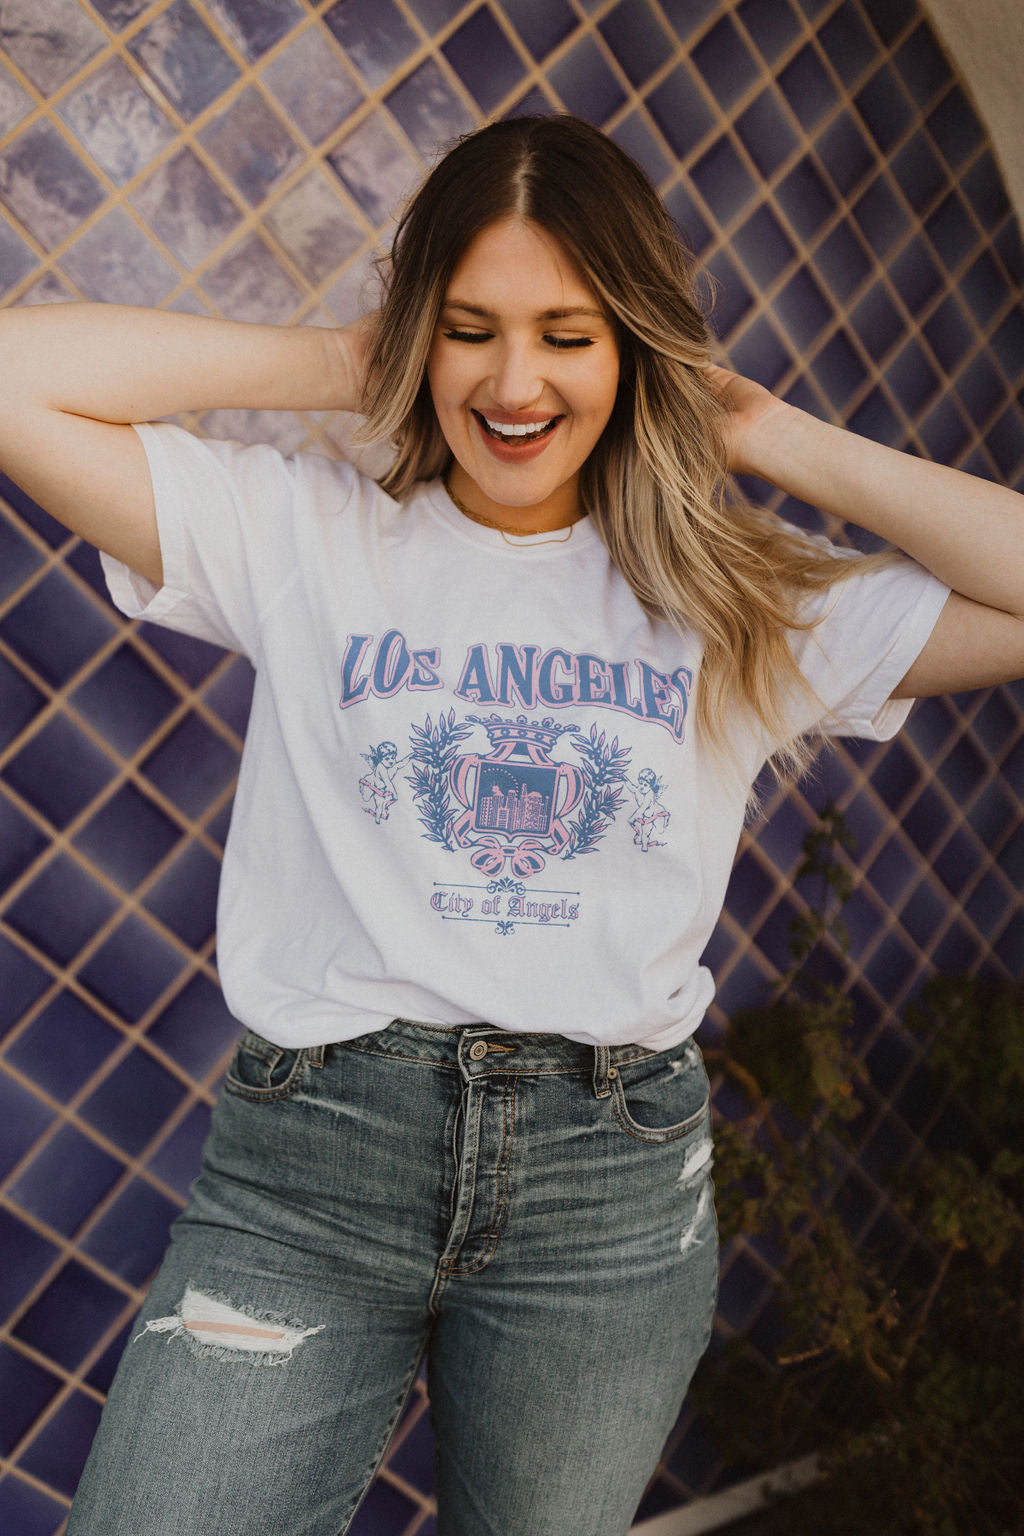 THE LOS ANGELES GRAPHIC TEE IN IVORY